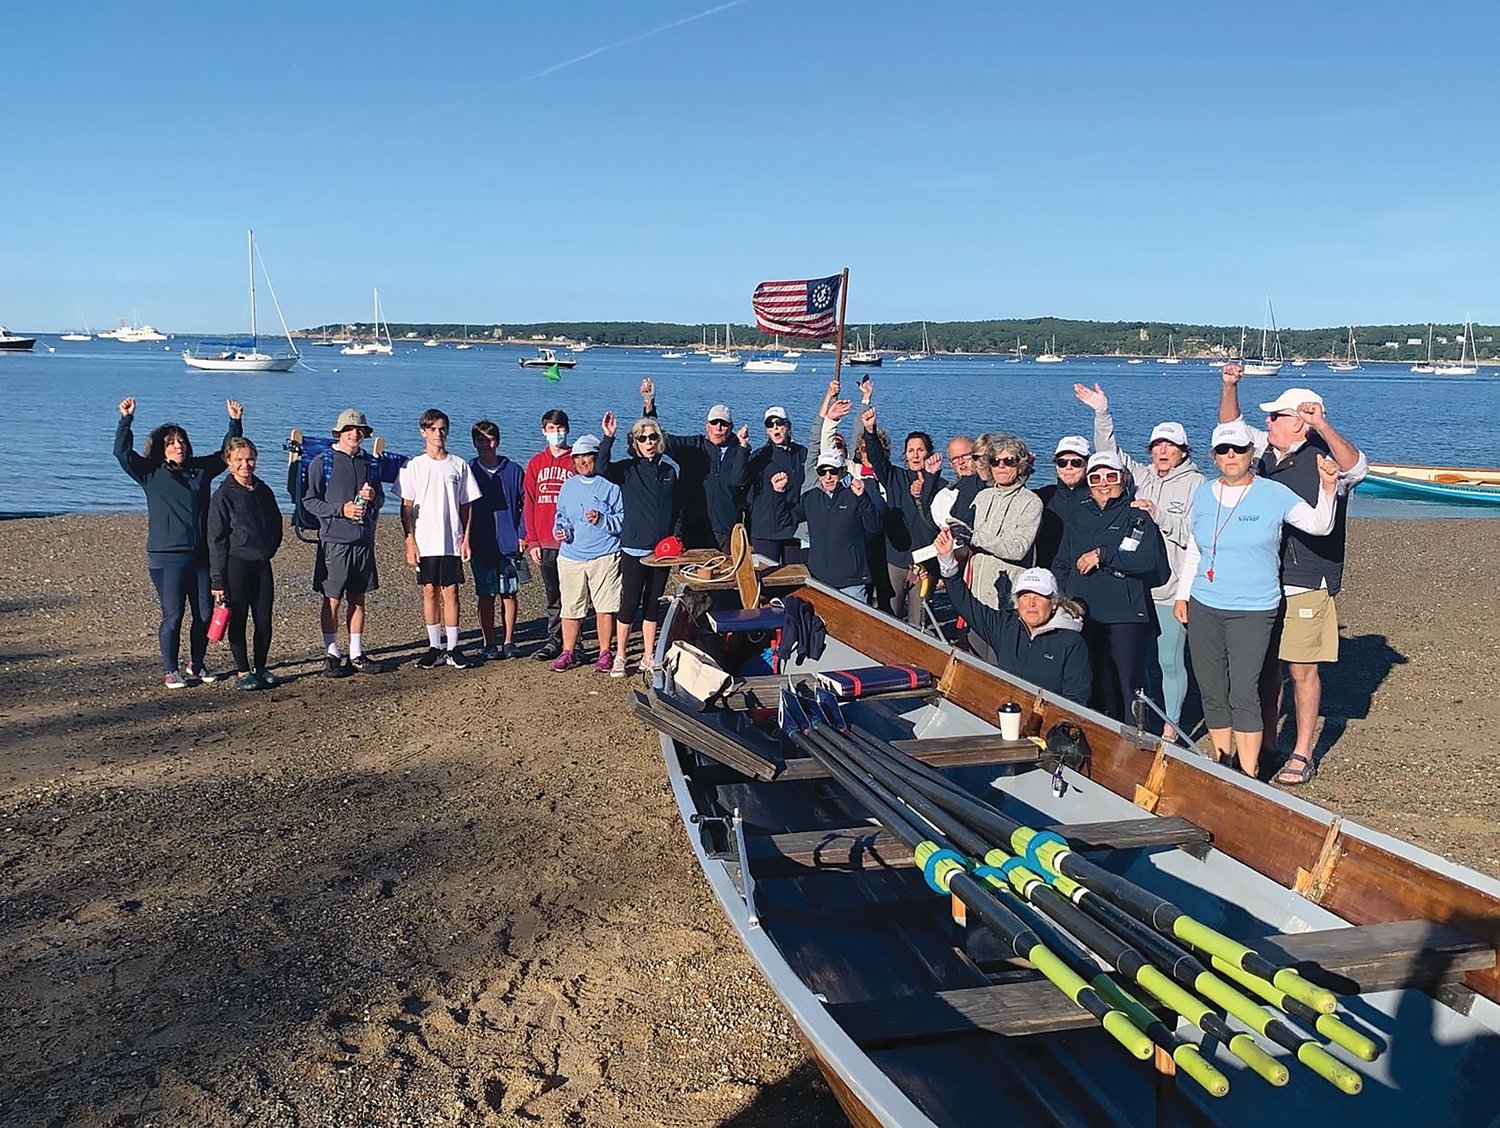 Adults and youth racers from Westport fared well in Saturday's races in Gloucester, earning several first place finishes in their respective categories.